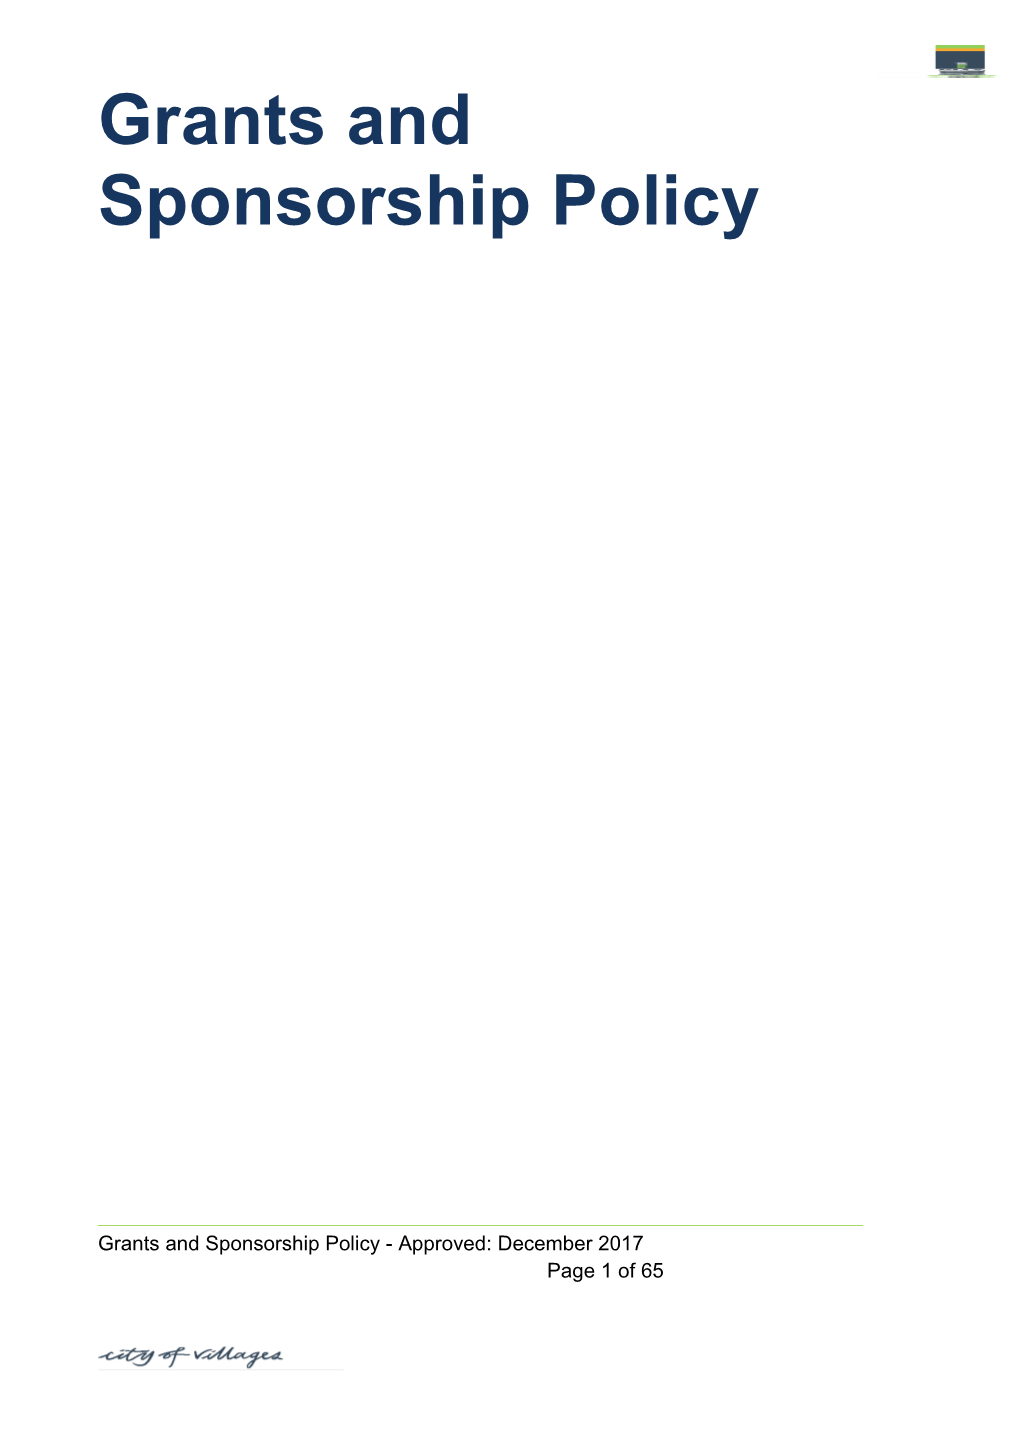 Grants and Sponsorship Policy December 2017